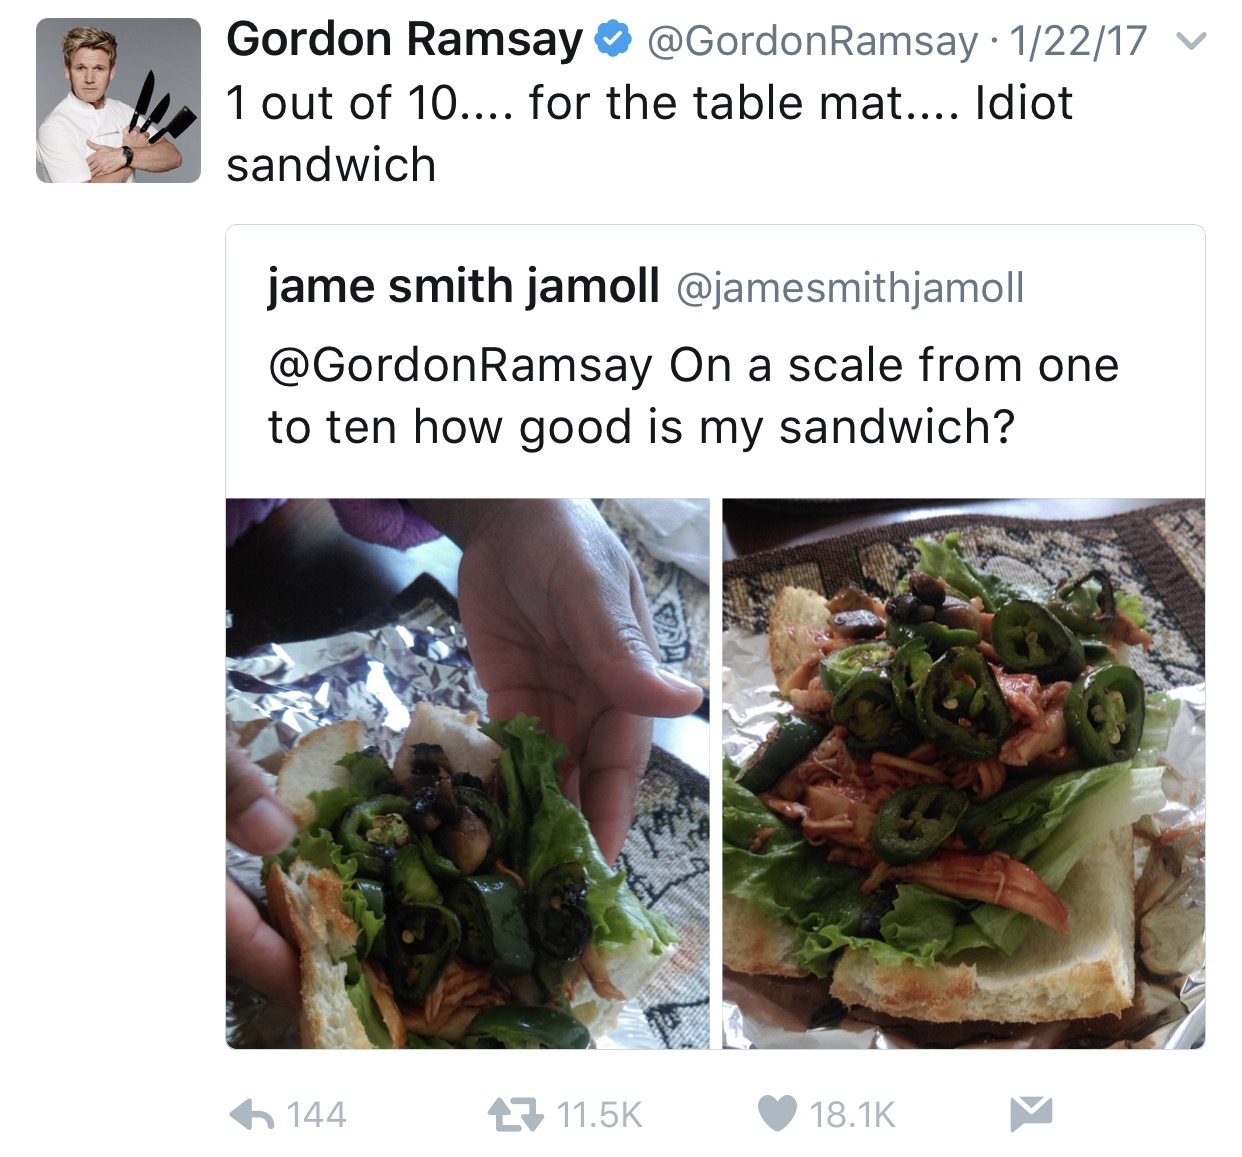 tweet - gordon ramsay twitter responses steak - Gordon Ramsay Ramsay 12217 V 1 out of 10.... for the table mat.... Idiot sandwich jame smith jamoll Ramsay On a scale from one to ten how good is my sandwich? 6 144 27